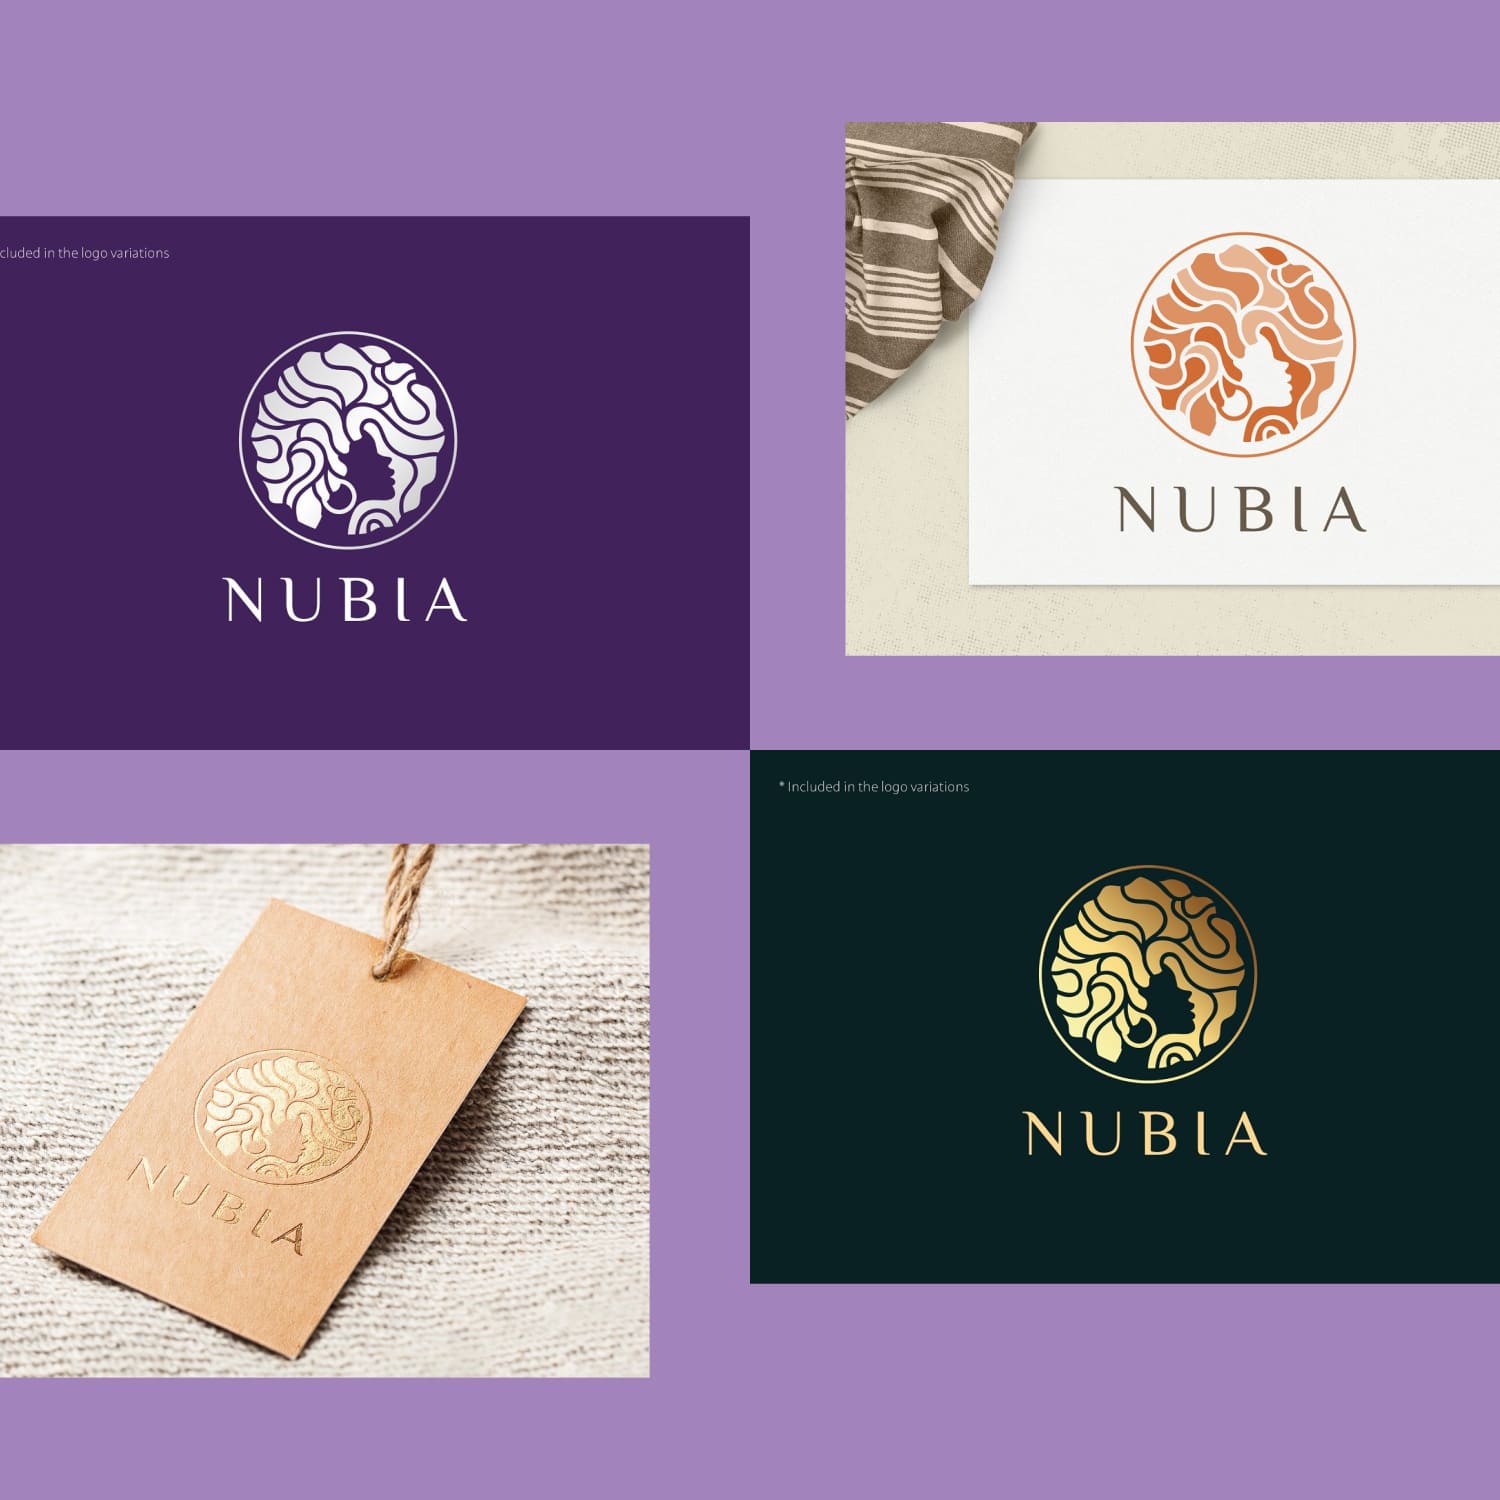 Colorful logo design with purple background.